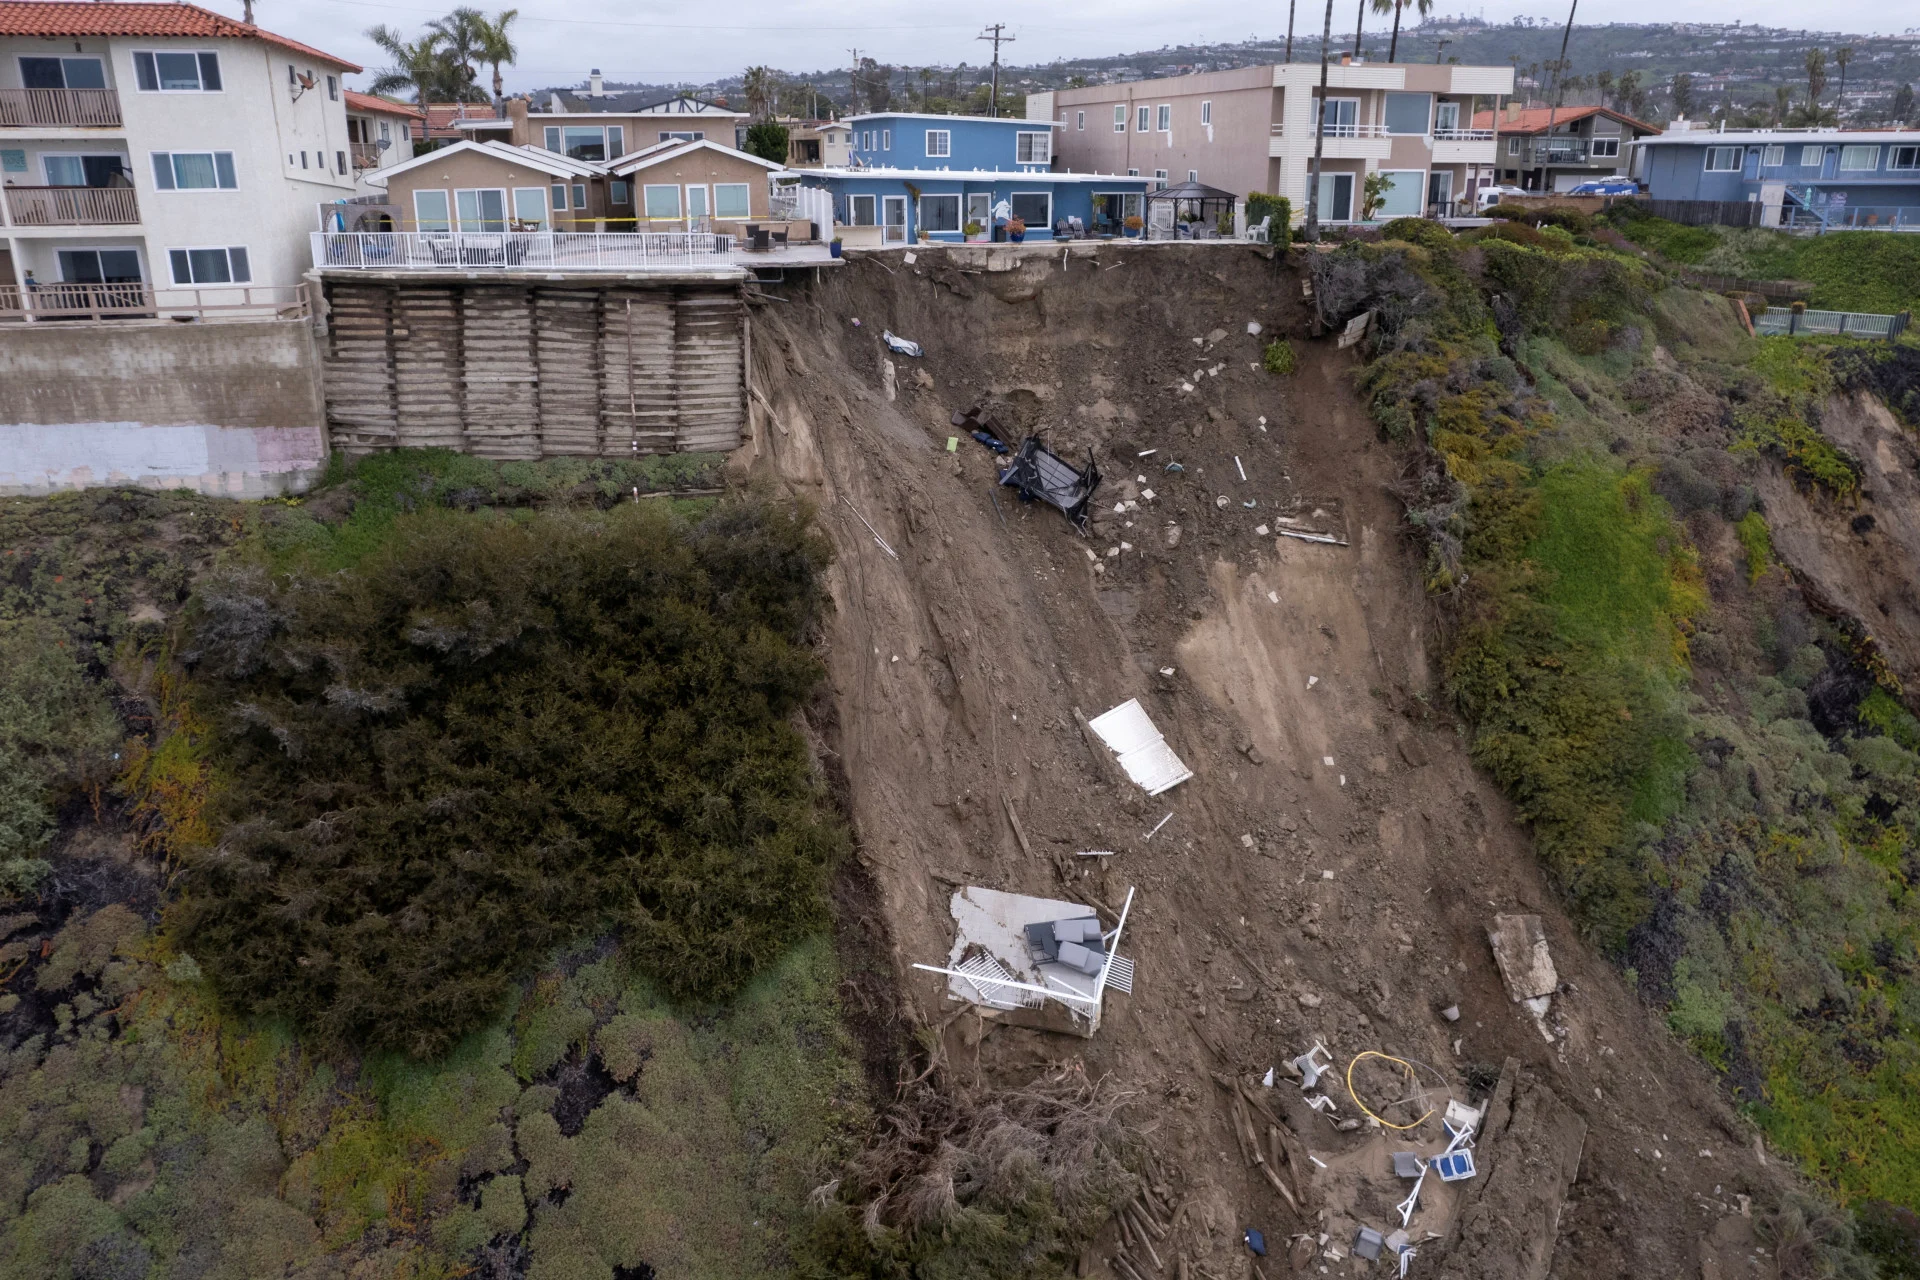 Reuters: FILE PHOTO: A backyard pool is left hanging on a cliffside after torrential rain brought havoc on the beachfront town of San Clemente, California, U.S. March 16, 2023. REUTERS/Mike Blake/File Photo